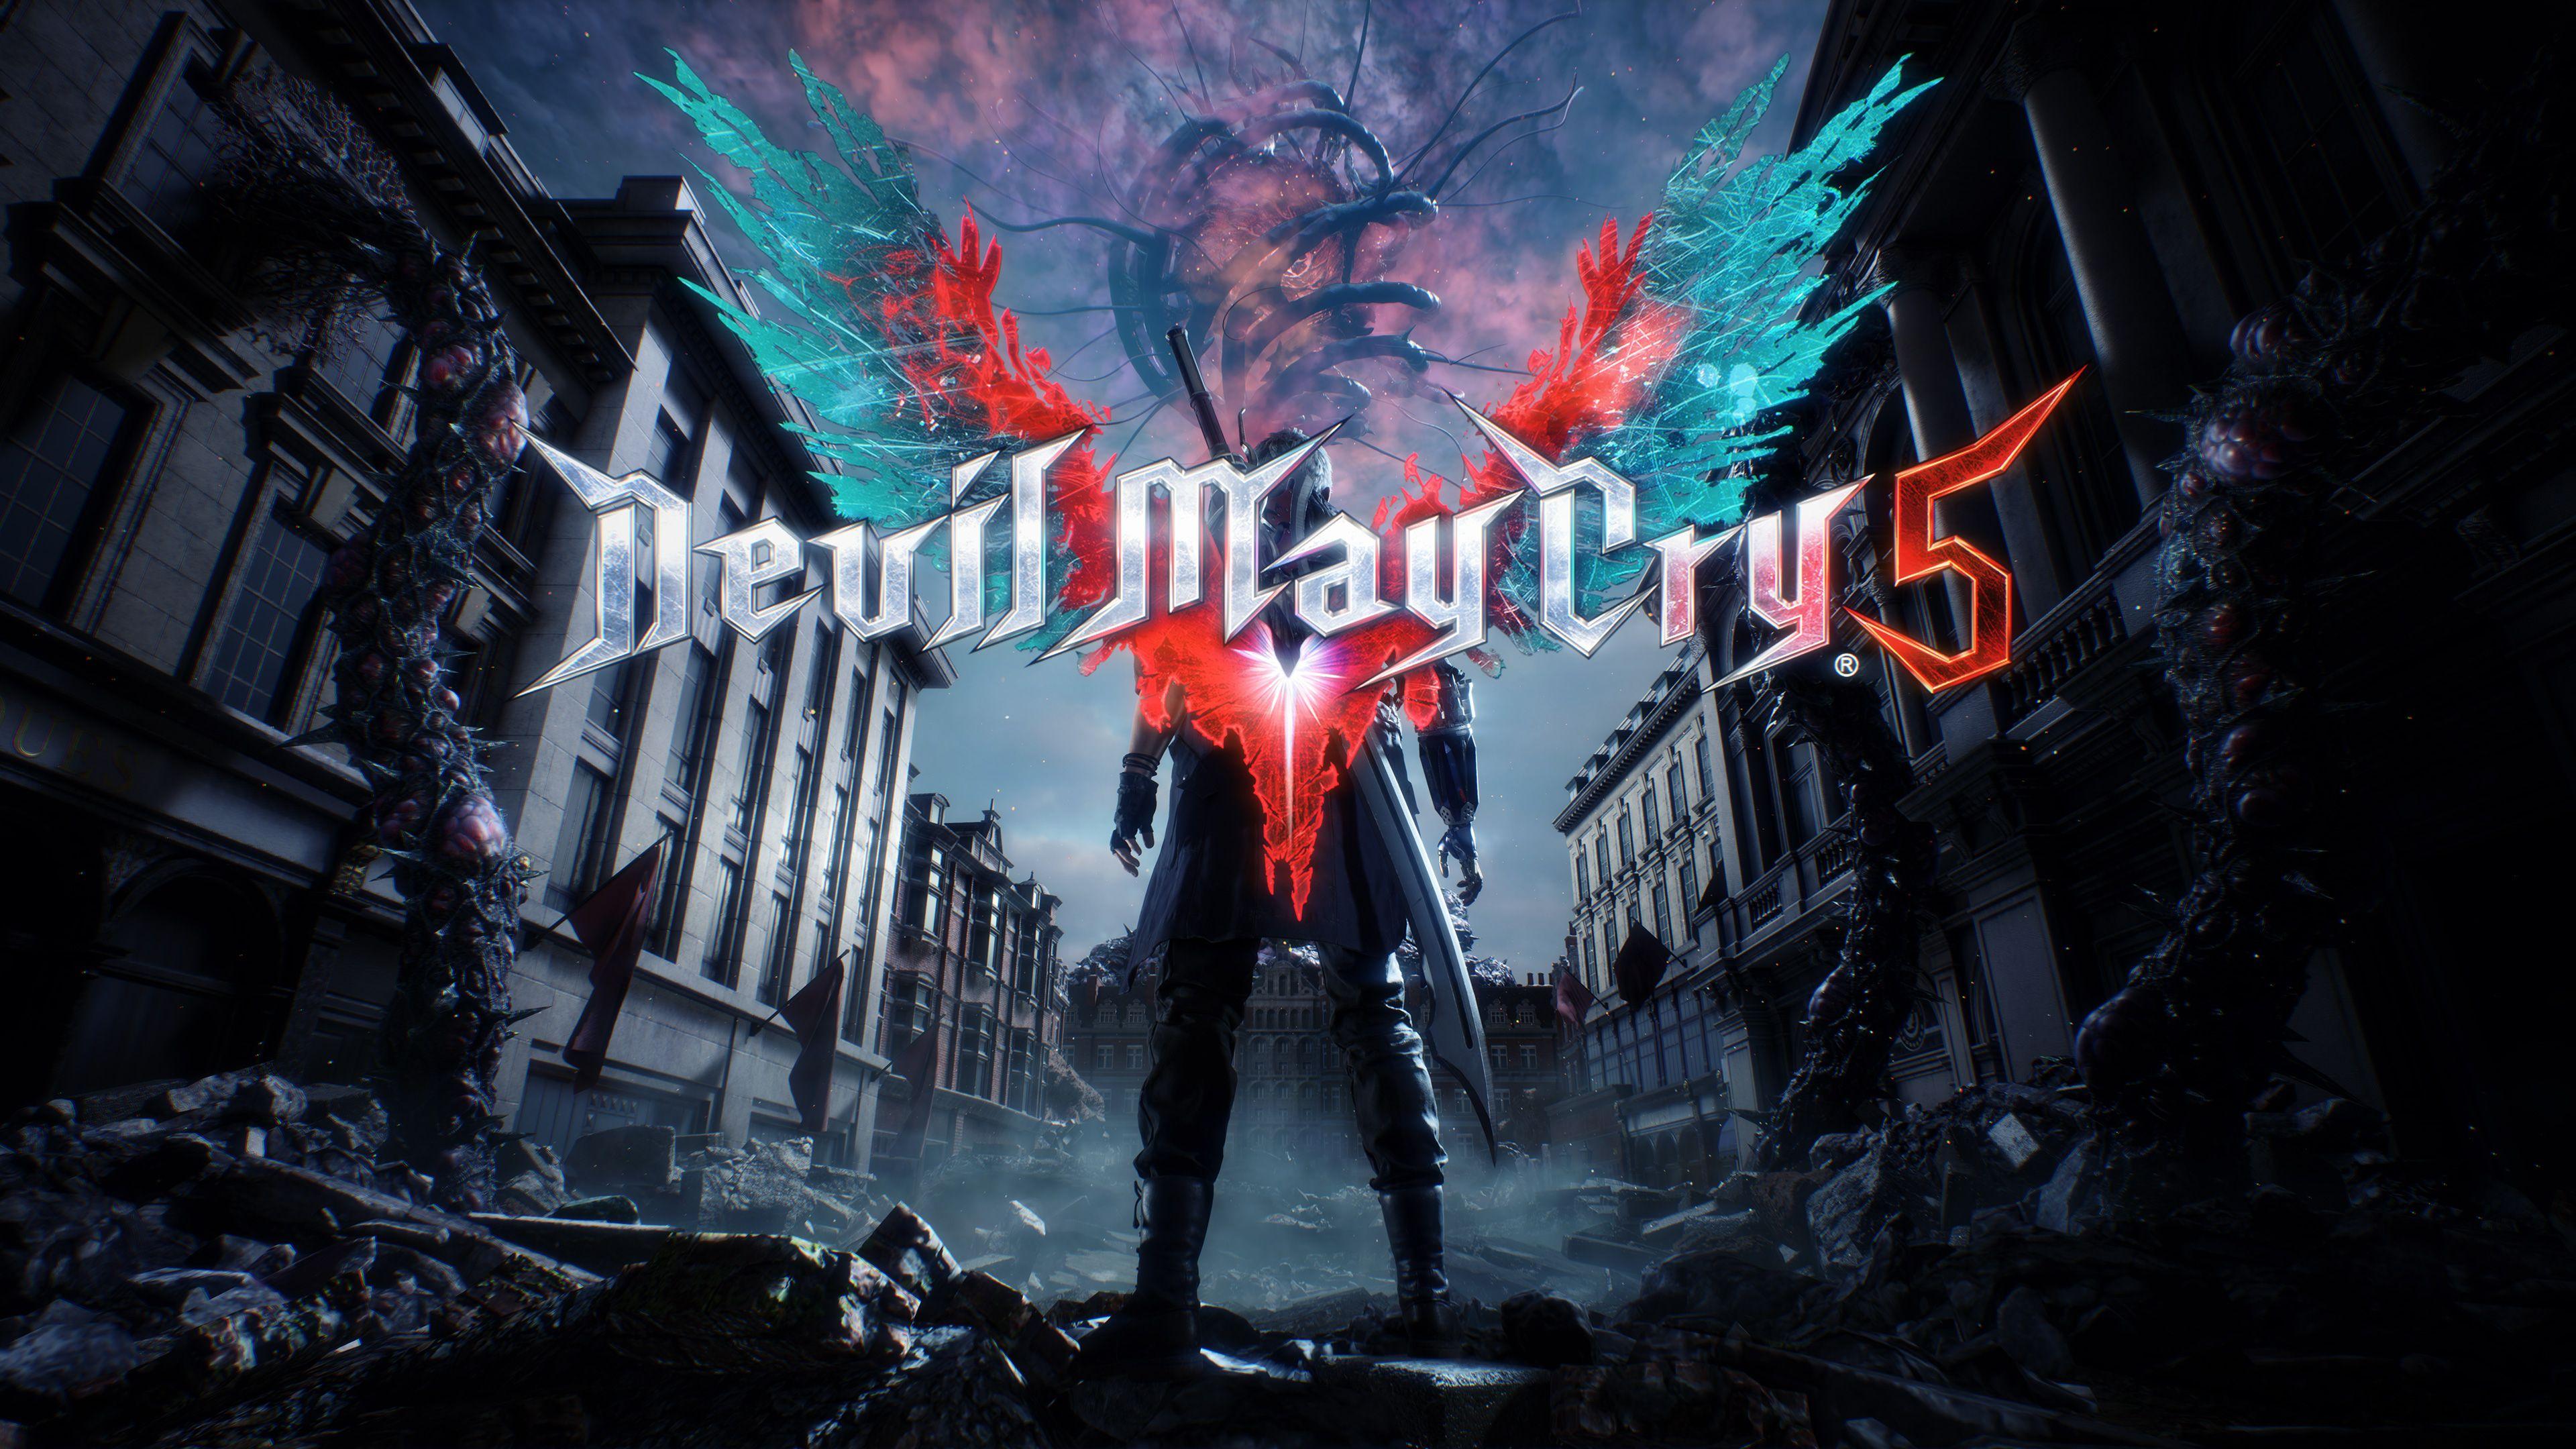 Devil May Cry 5 Hd Wallpapers Top Free Devil May Cry 5 Hd Backgrounds Wallpaperaccess